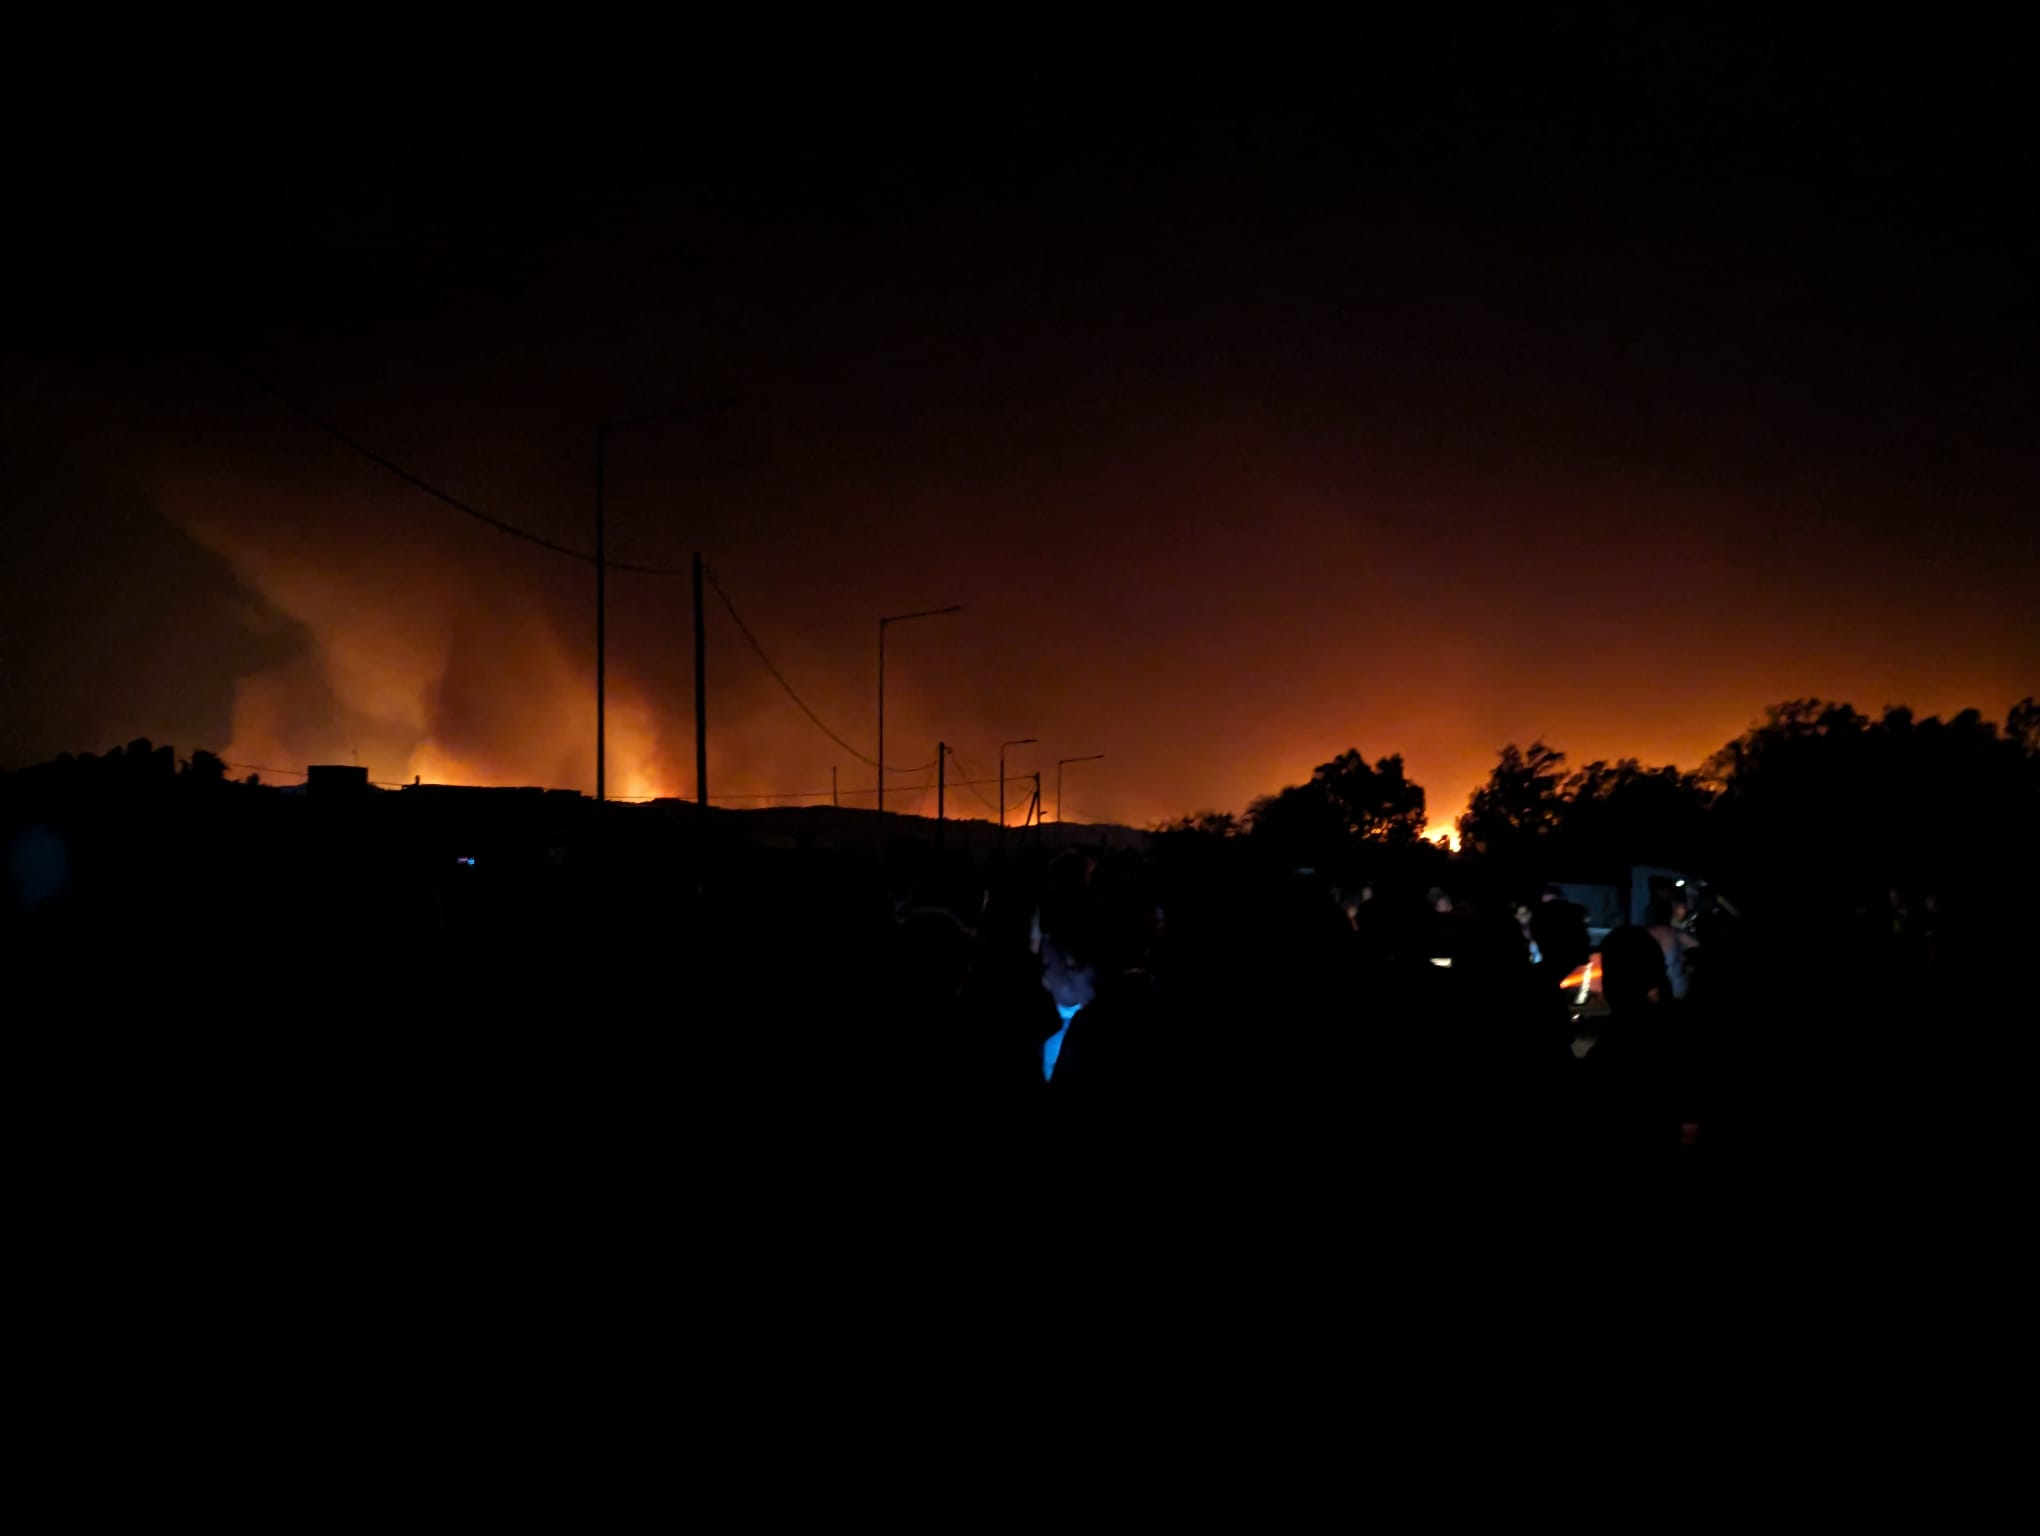 Photo taken by Conor Cullen as he and his family were forced to evacuate the Greek island of Rhodes due to wildfire. (Handout/ Conor Cullen)